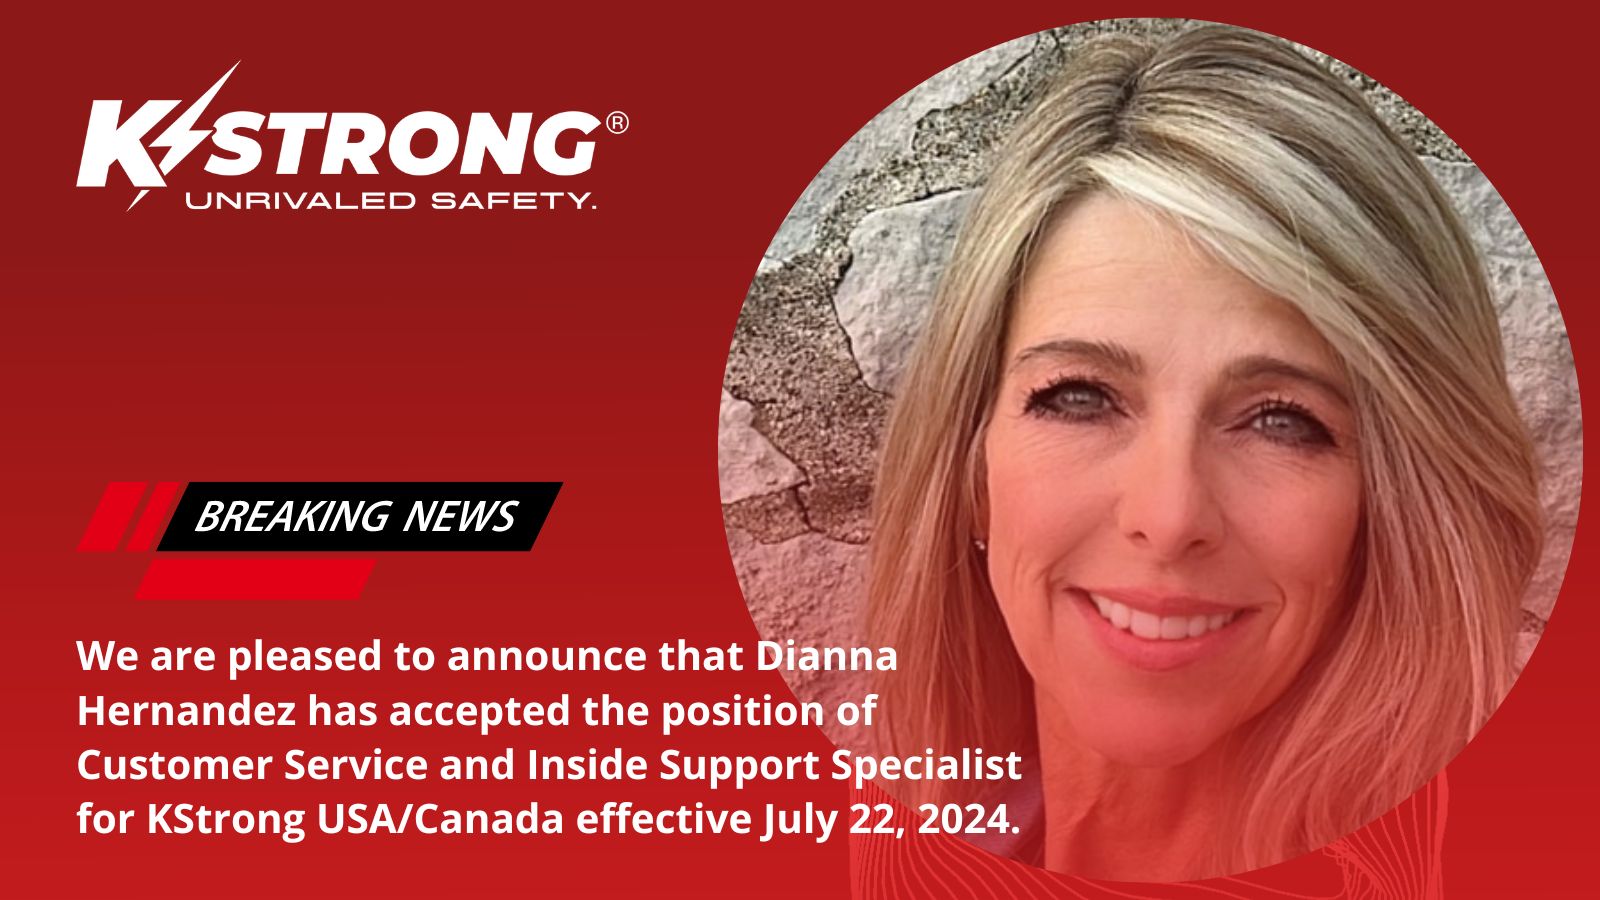 KStrong USA/Canada Welcomes Dianna Hernandez as Customer Service and Inside Support Specialist